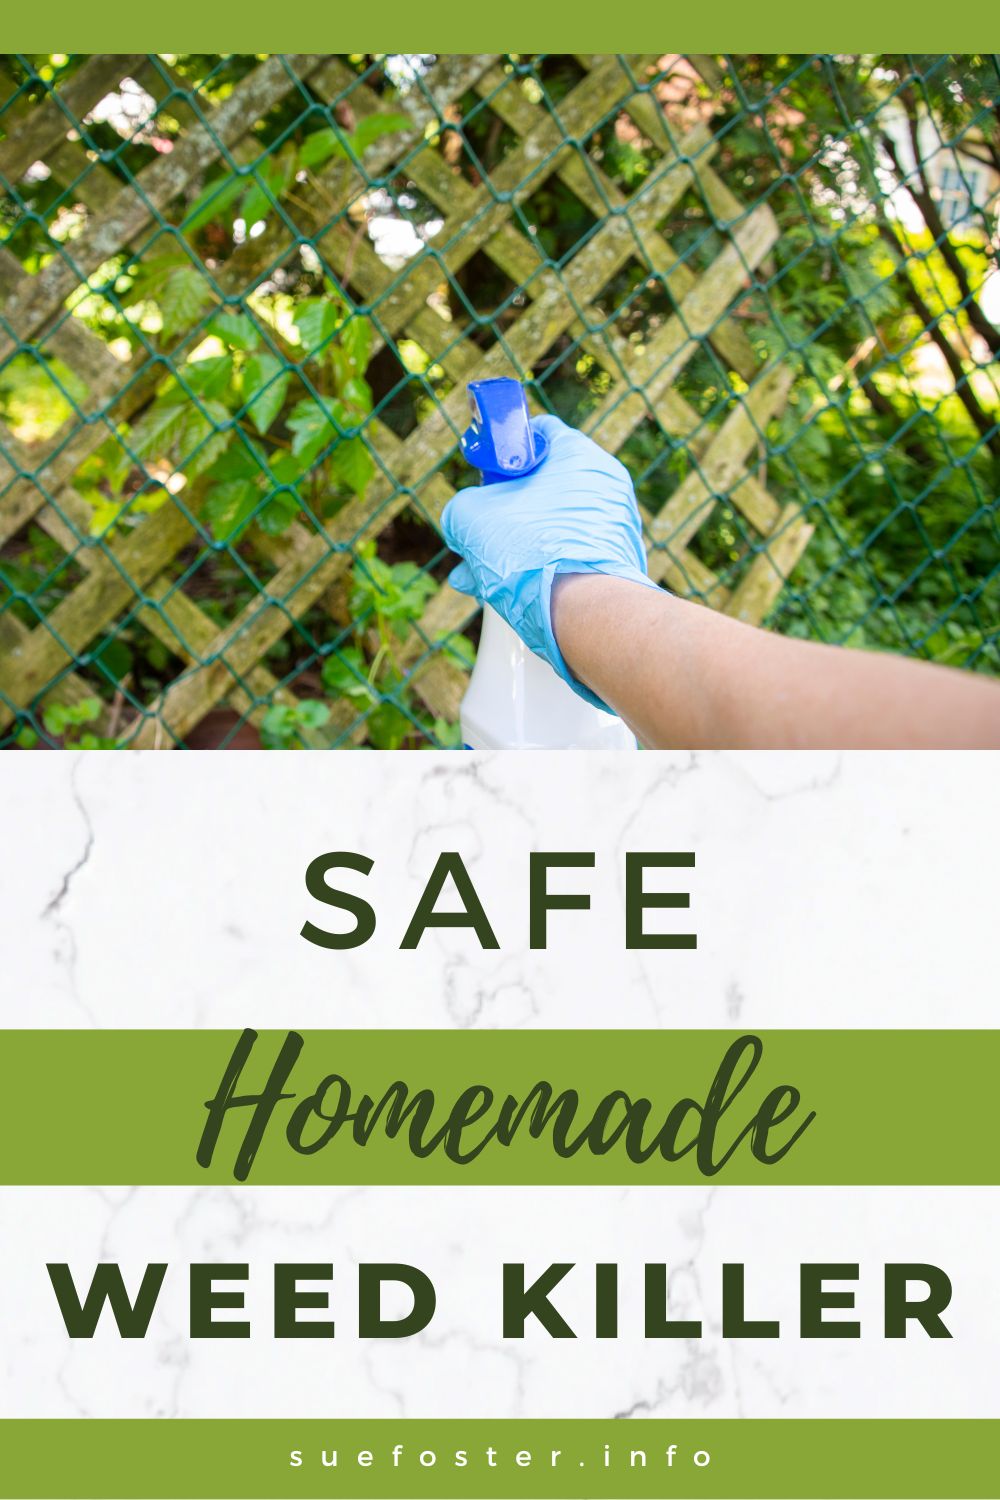 Make this safe homemade weed killer that works and is kind to the environment. It's ideal for gardeners, landscapers, and homeowners.